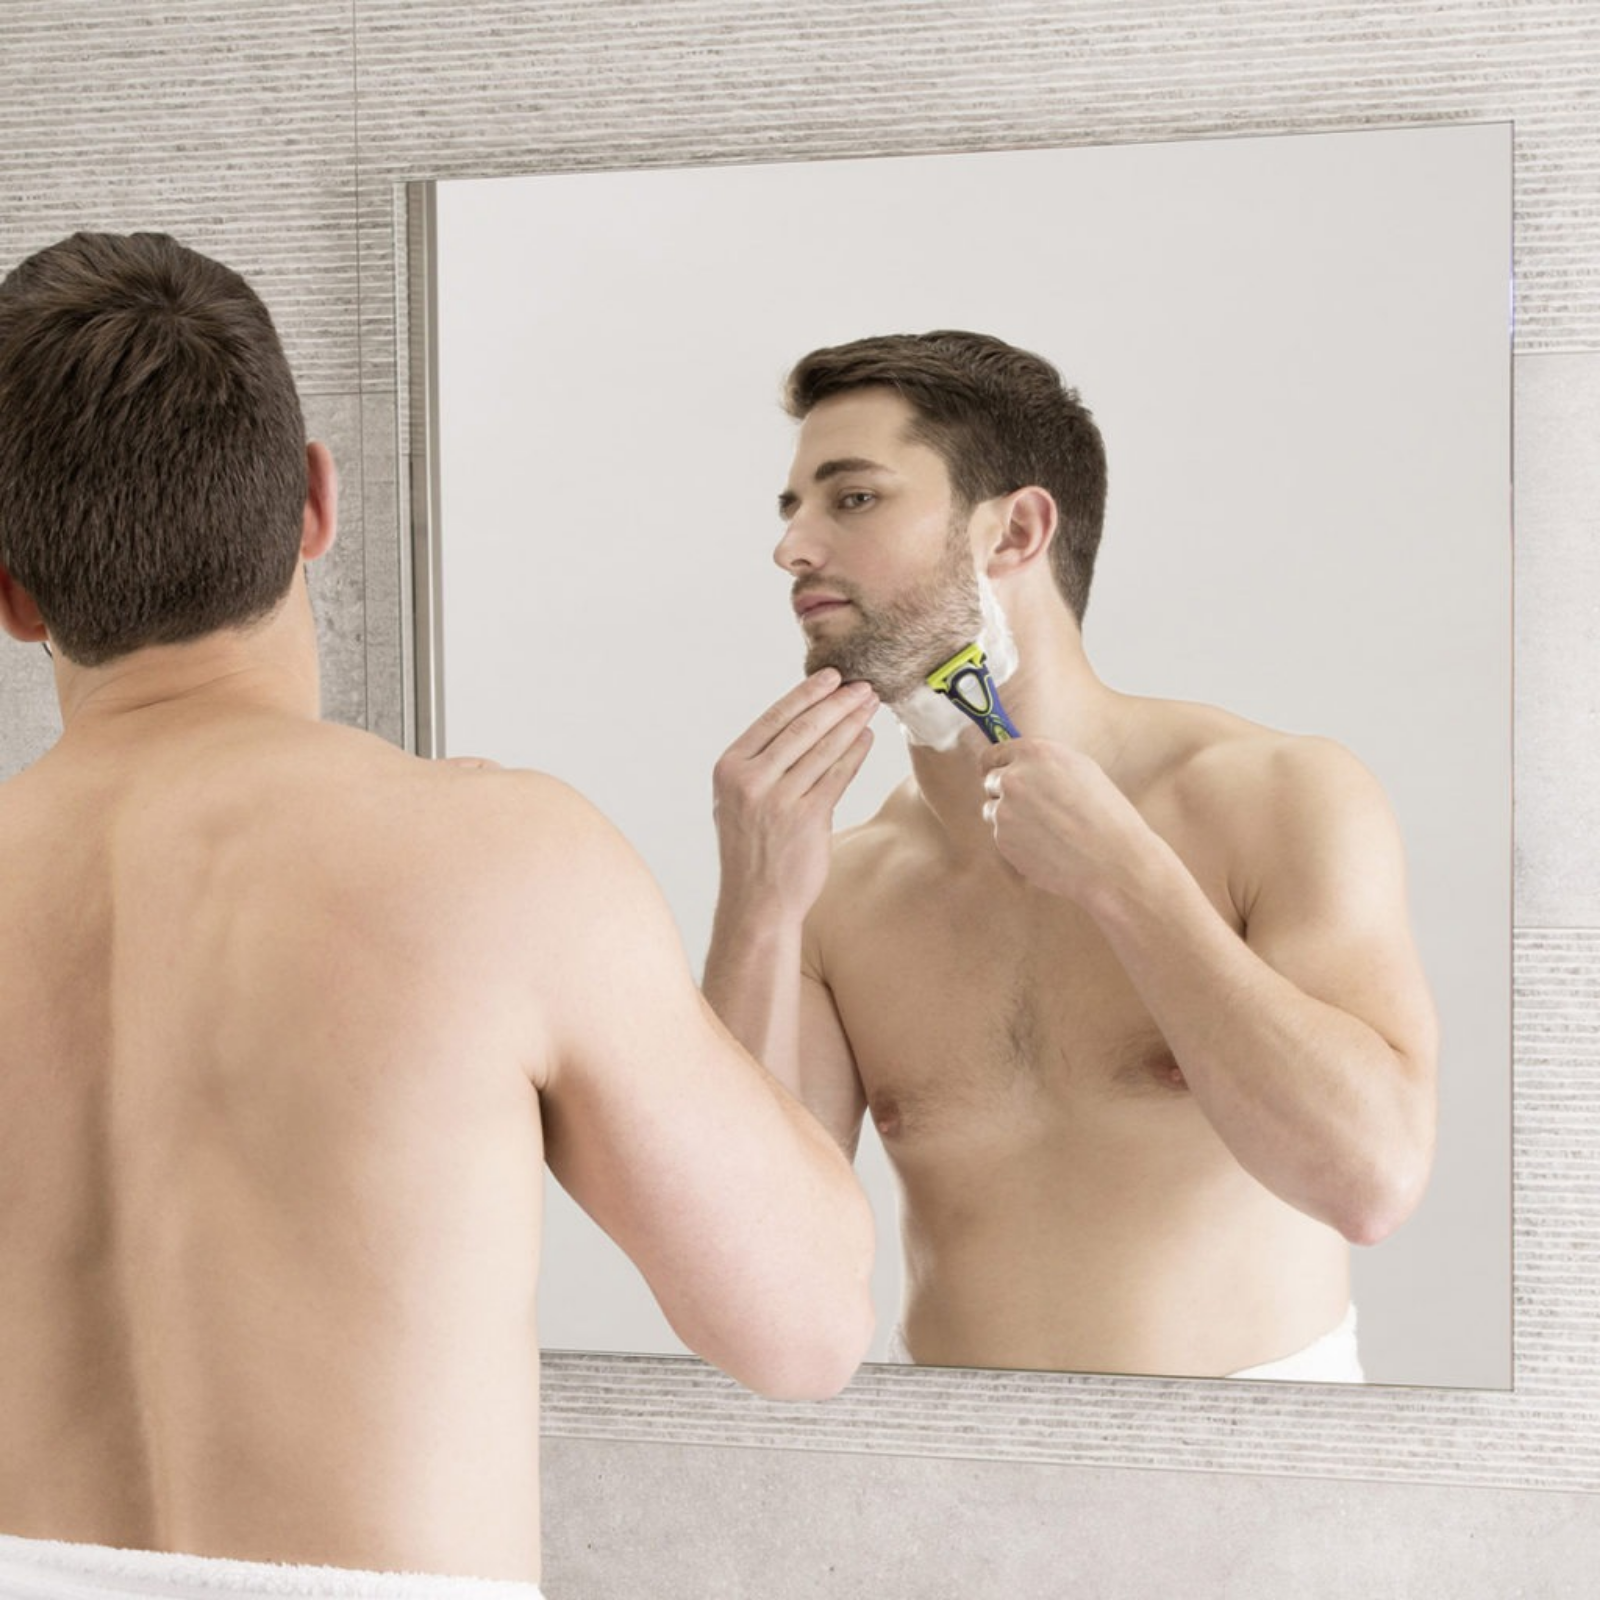 Should You Shave Before Or After Showering?